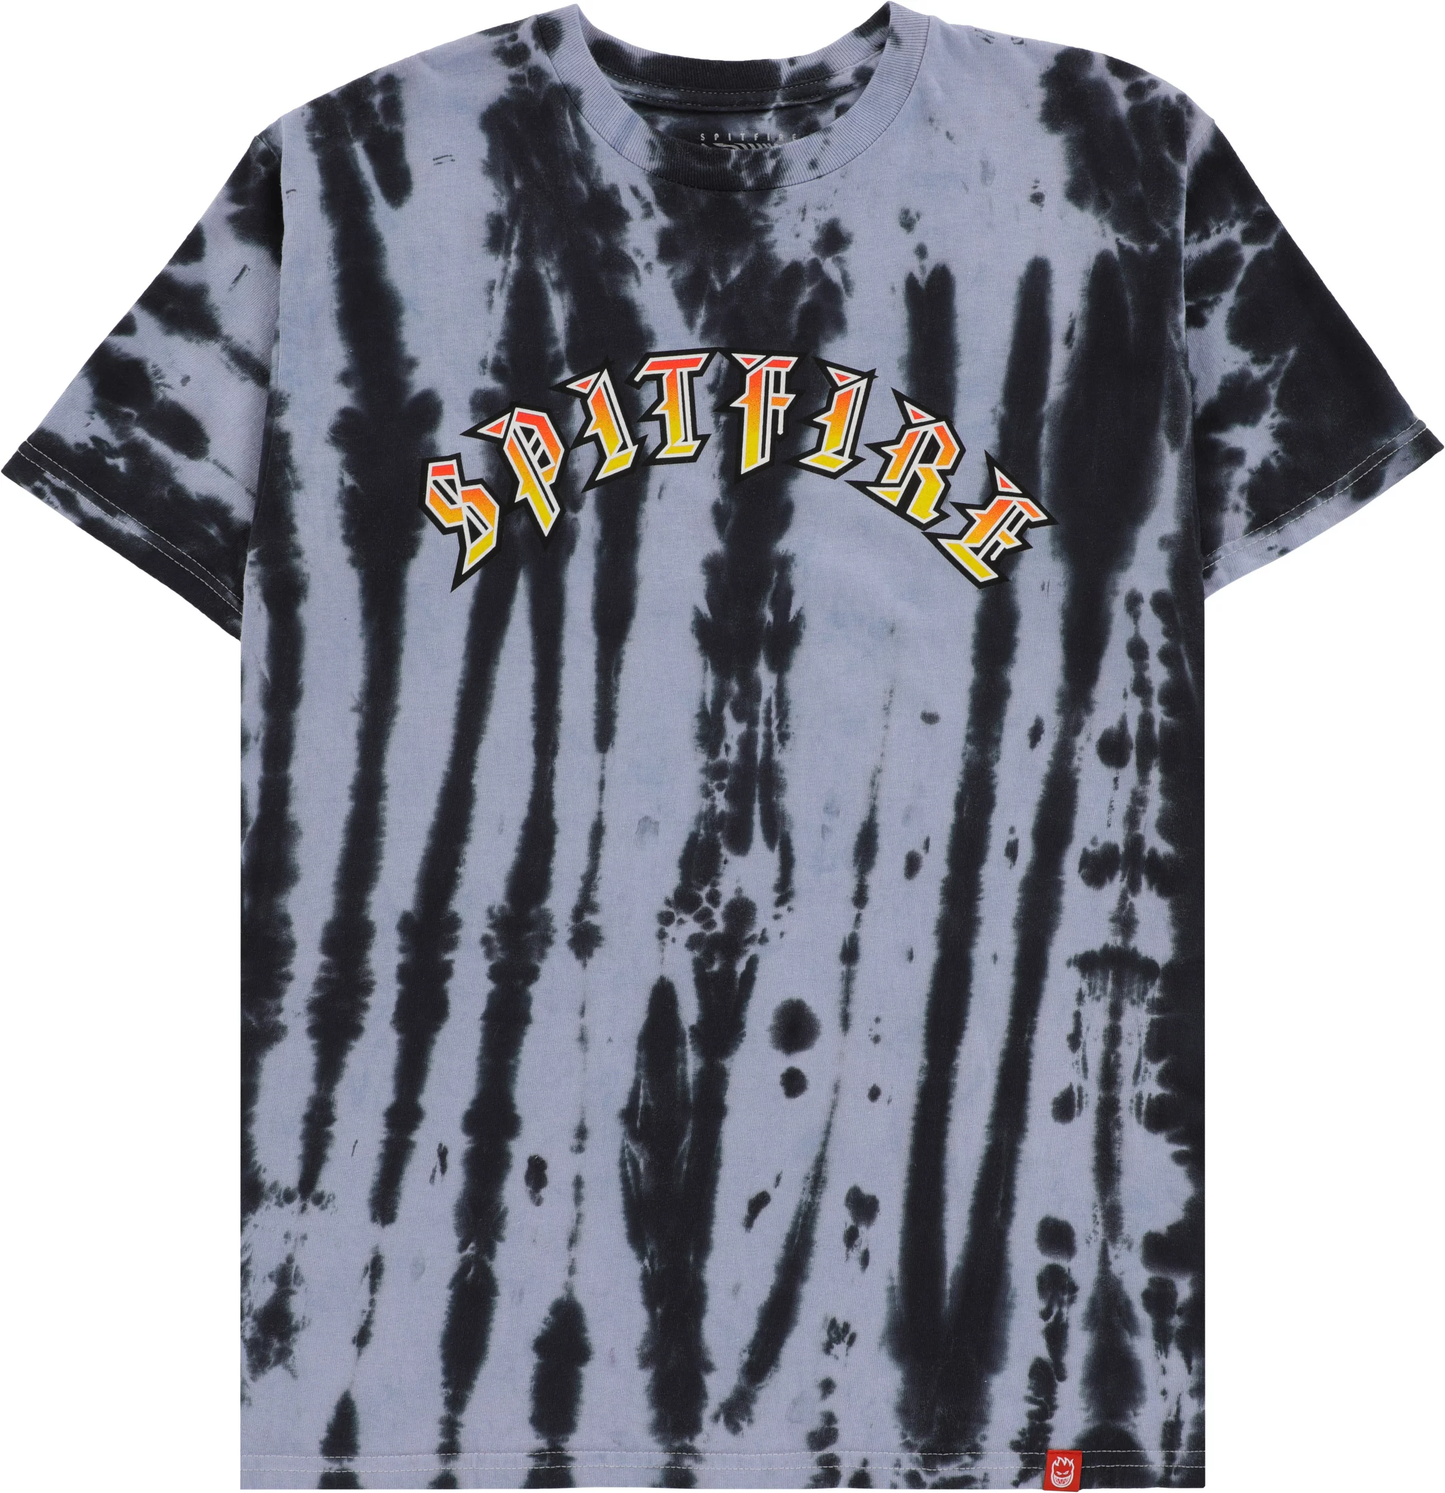 SPITFIRE OLD E T-SHIRT BLACK WHITE PLEATED WASH